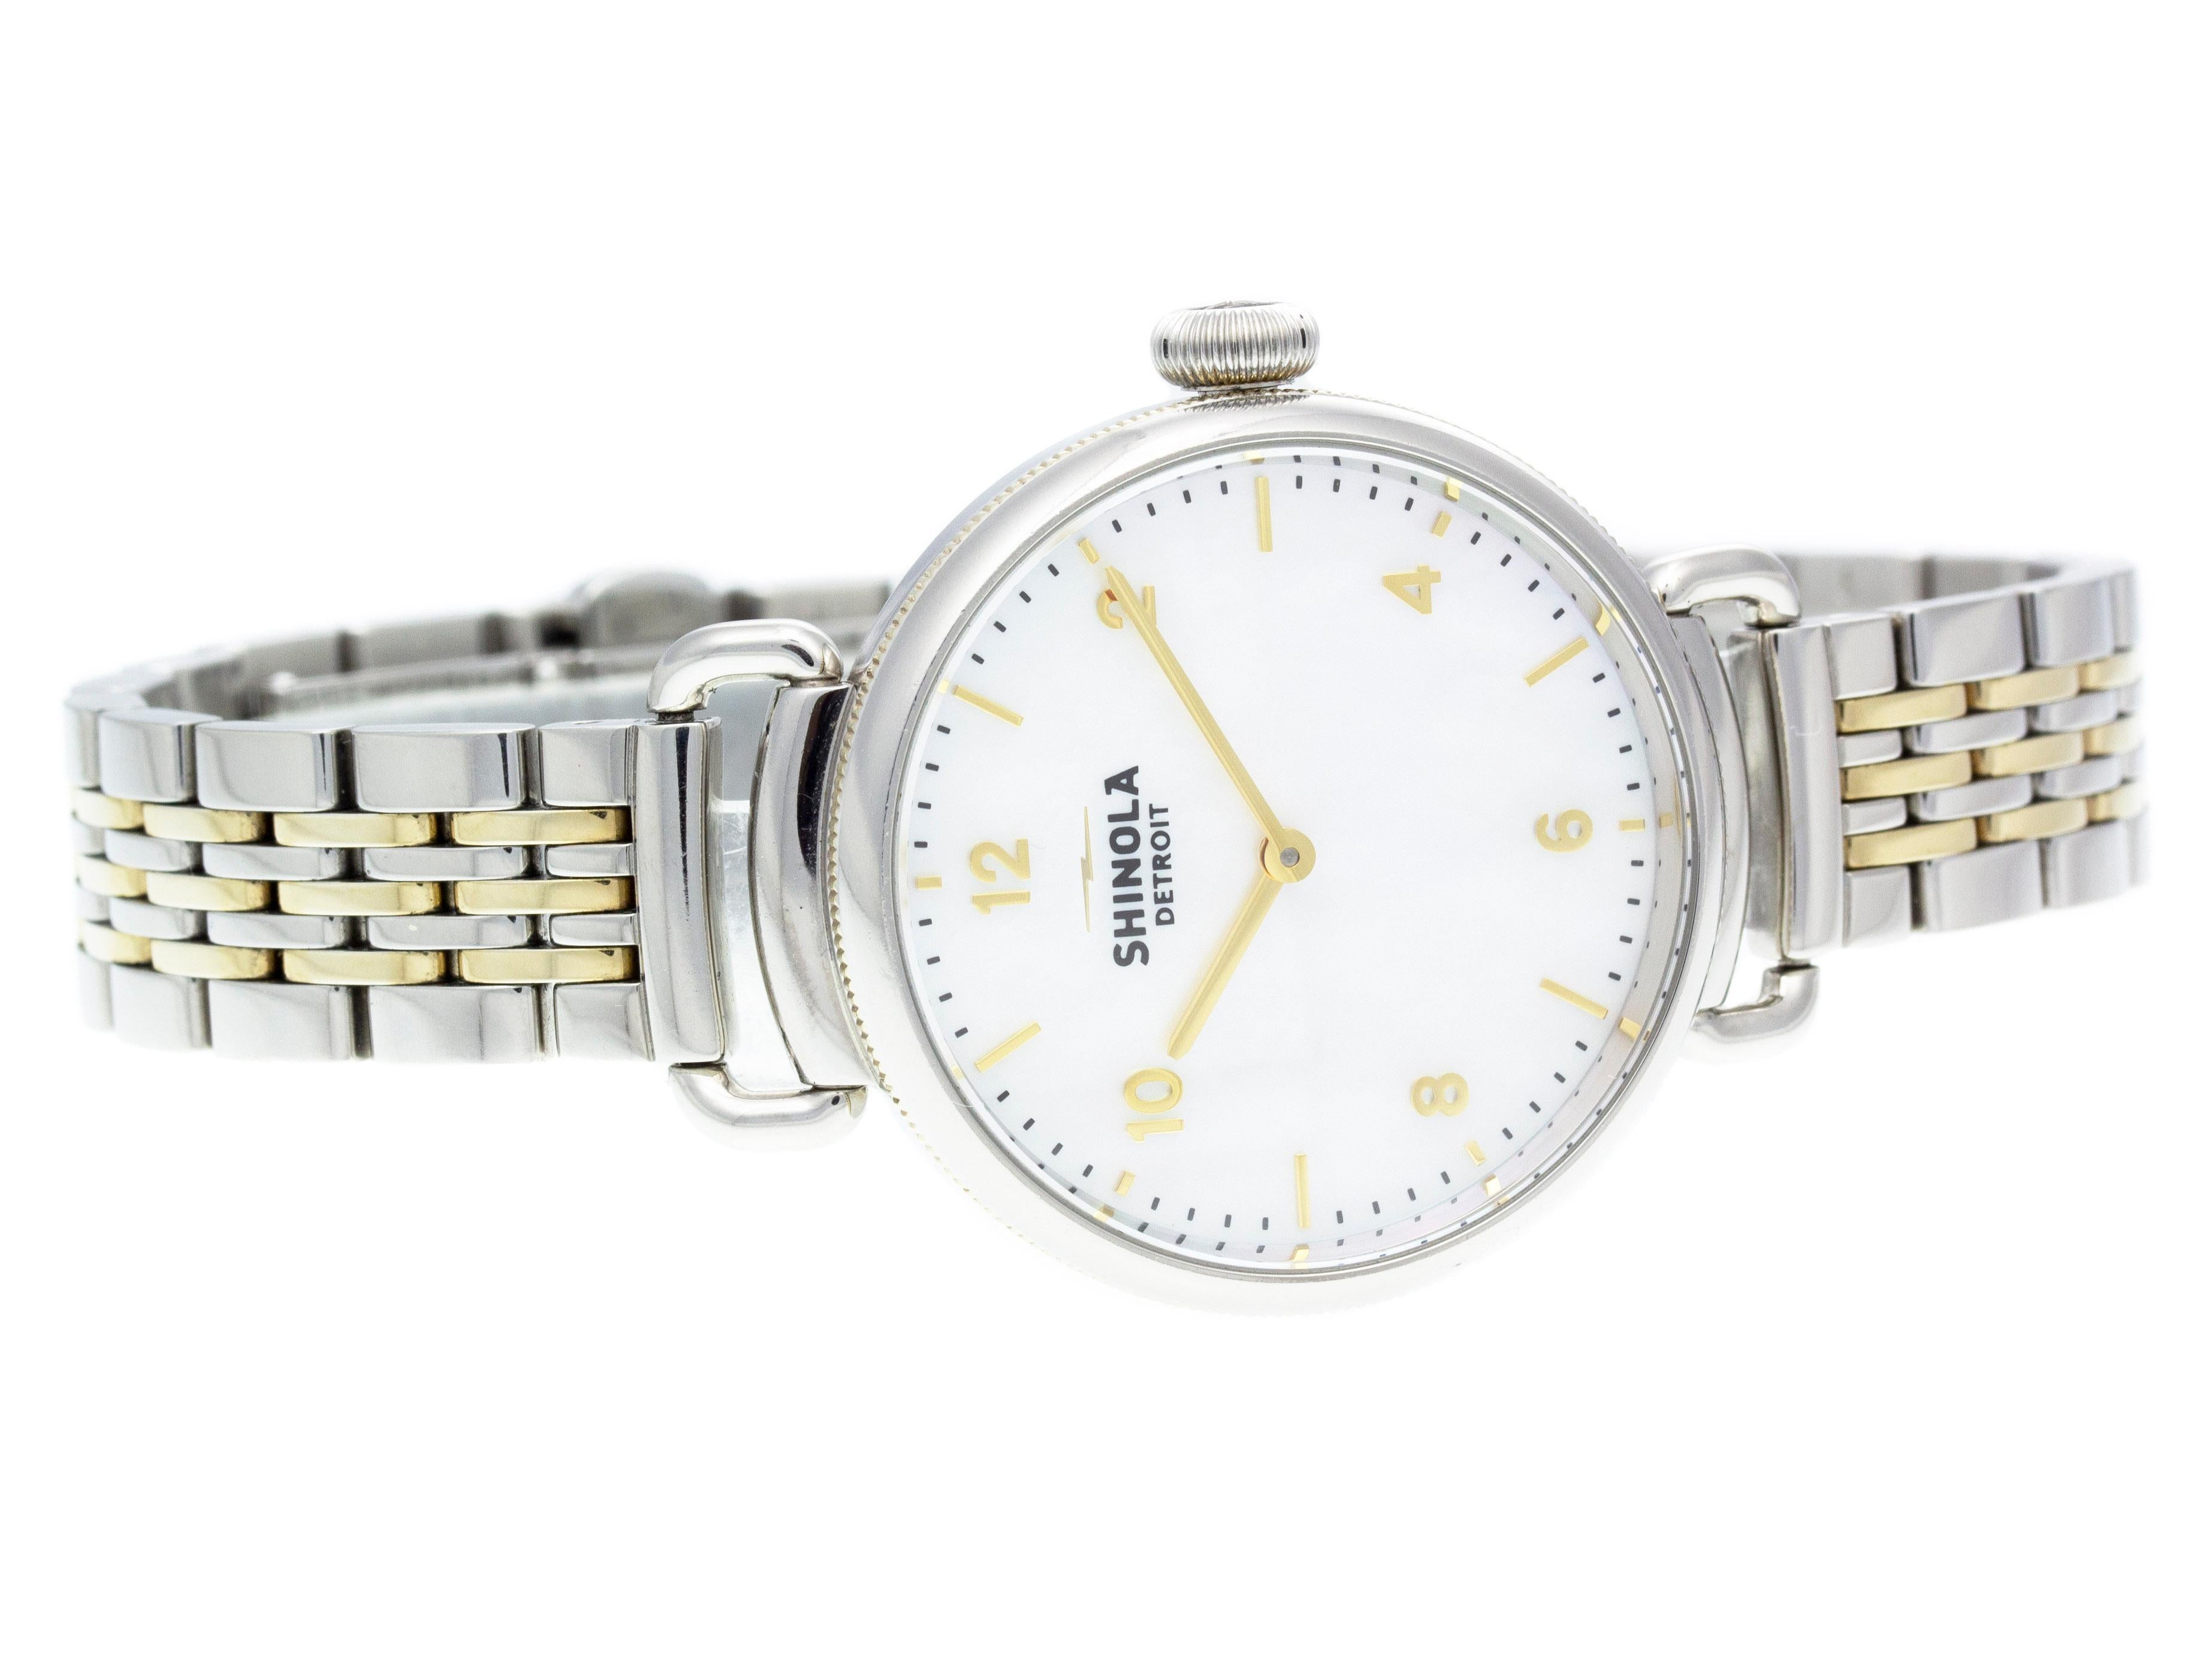 Steel Shinola The Canfield watch with a 32mm case, mother of pearl dial, and two tone bracelet with folding clasp. Features include hours and minutes. Comes with a Deluxe Gift Box and 2 Year Store Warranty.​

Brand	Shinola
Series	The